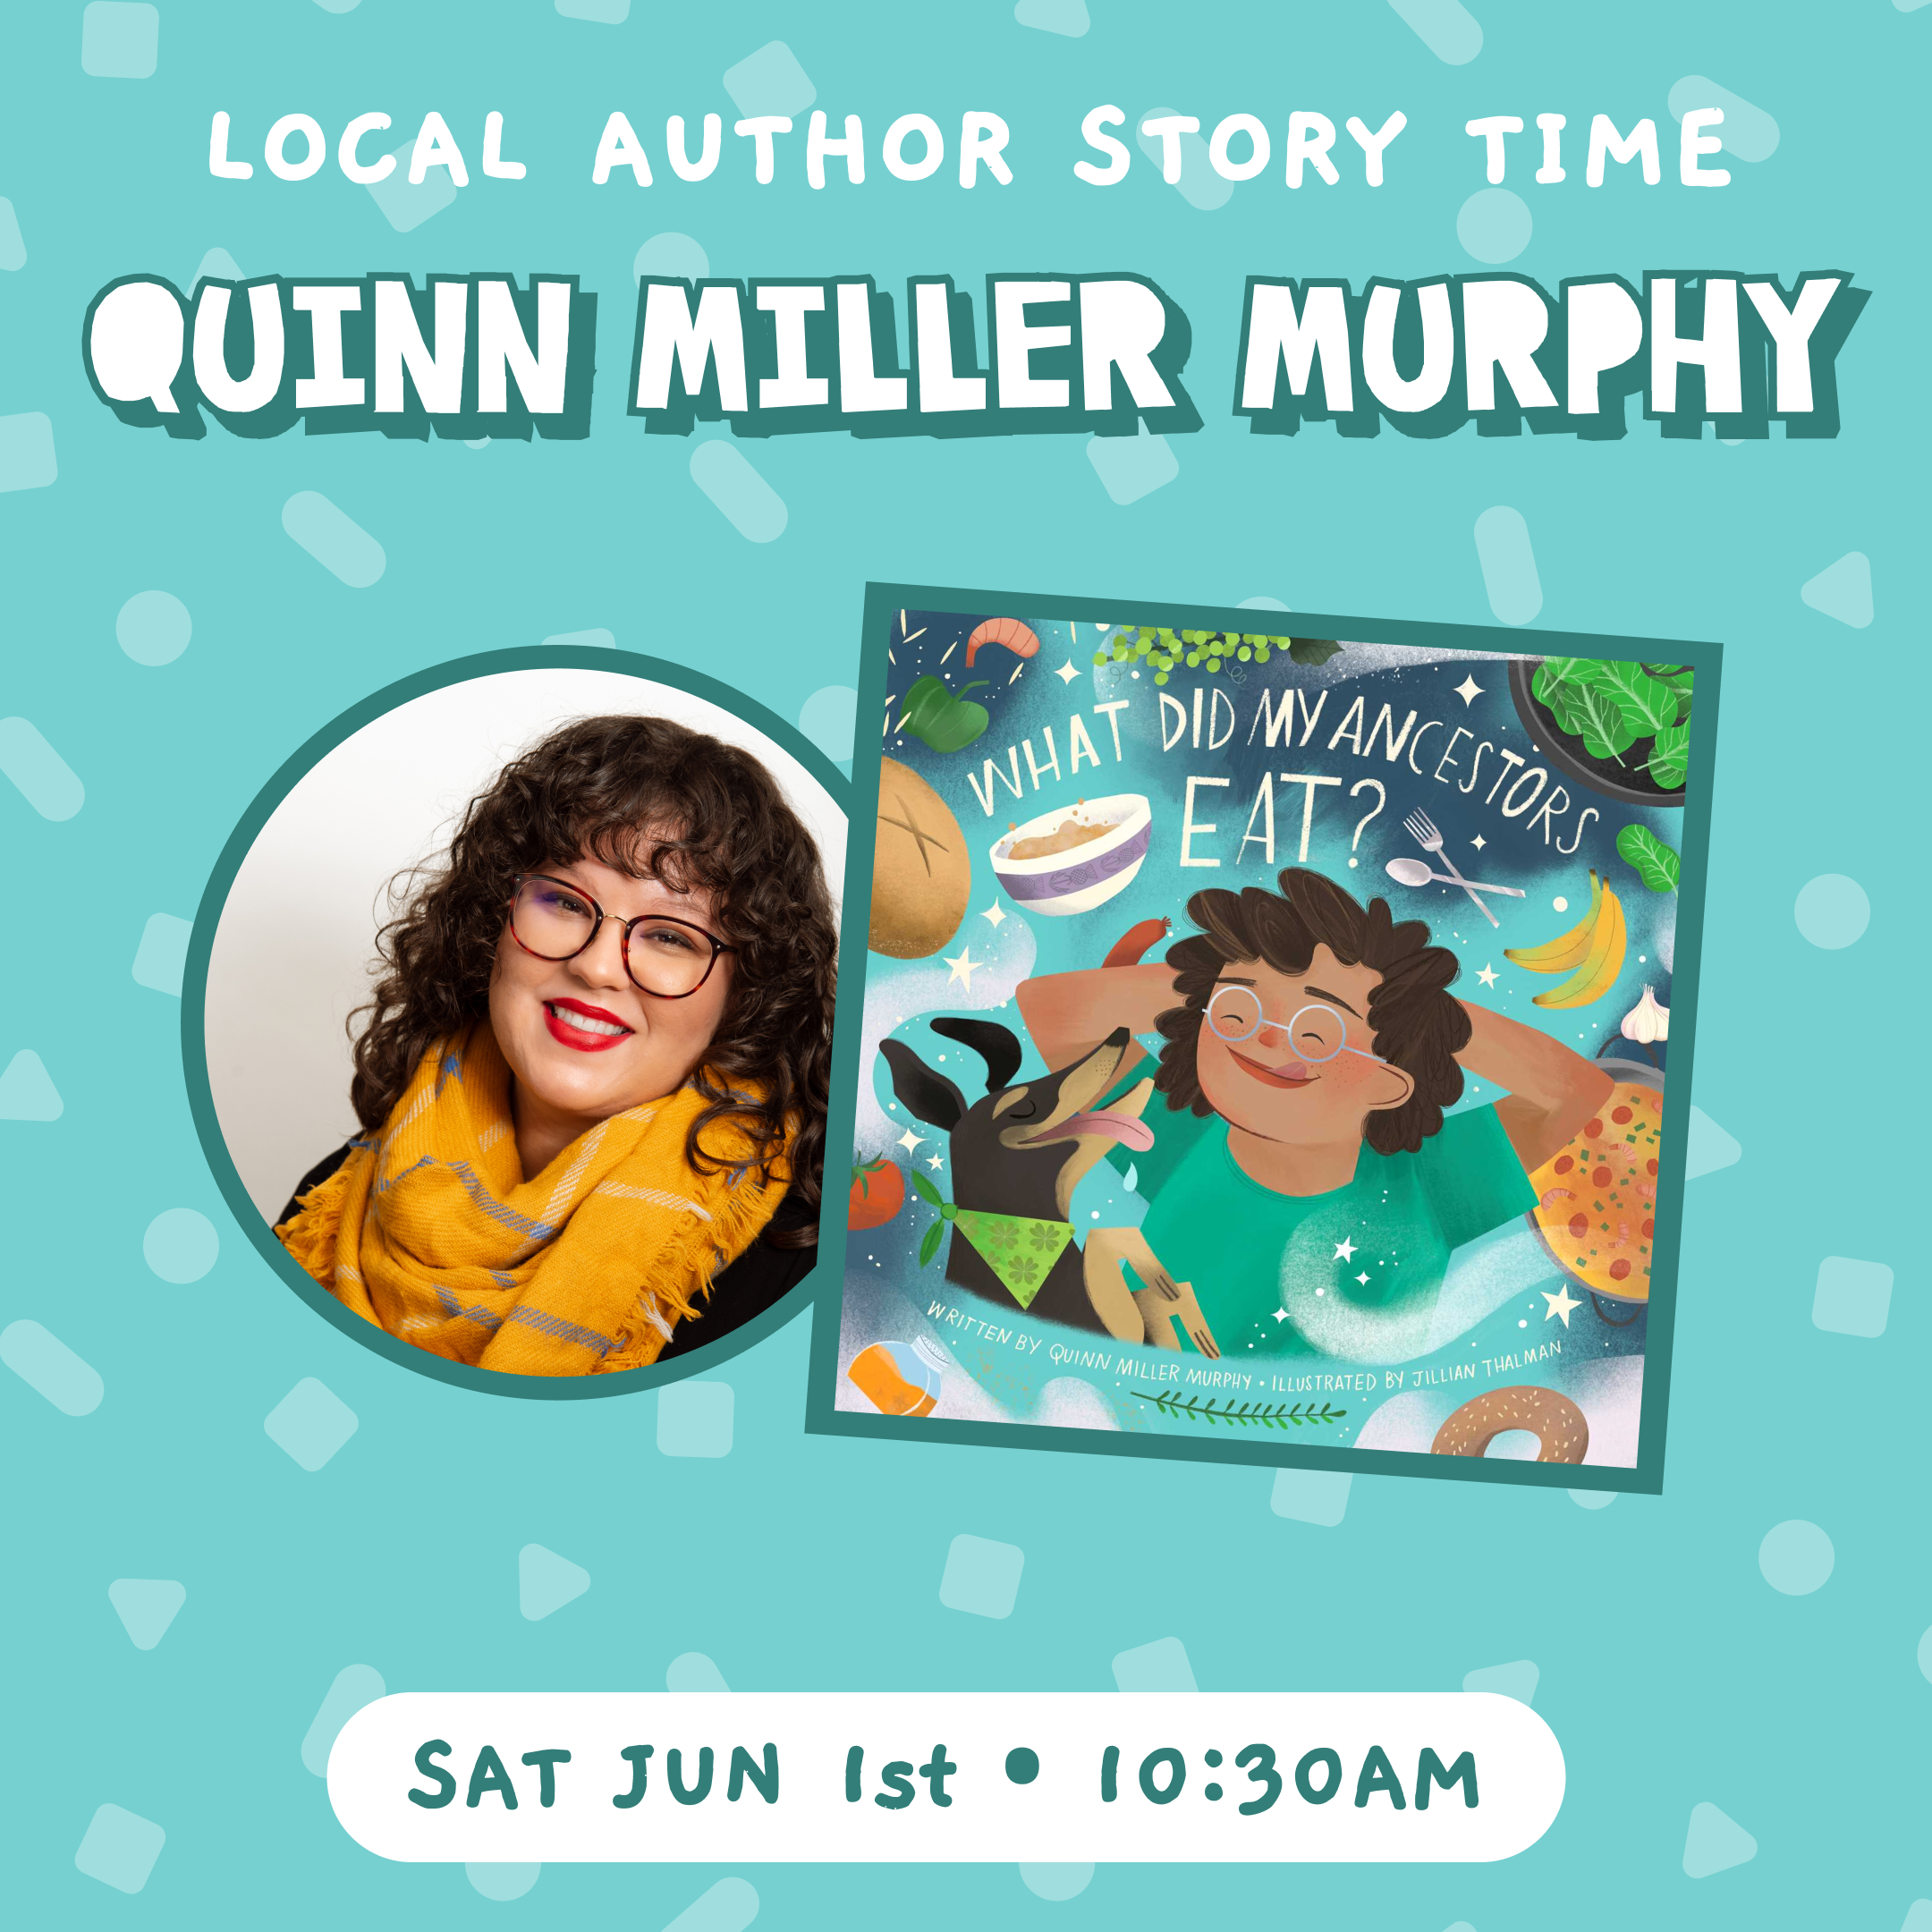 What Did My Ancestors Eat? Author Story Time with Quinn Miller Murphy at  Hammer + Jacks – PDX Parent